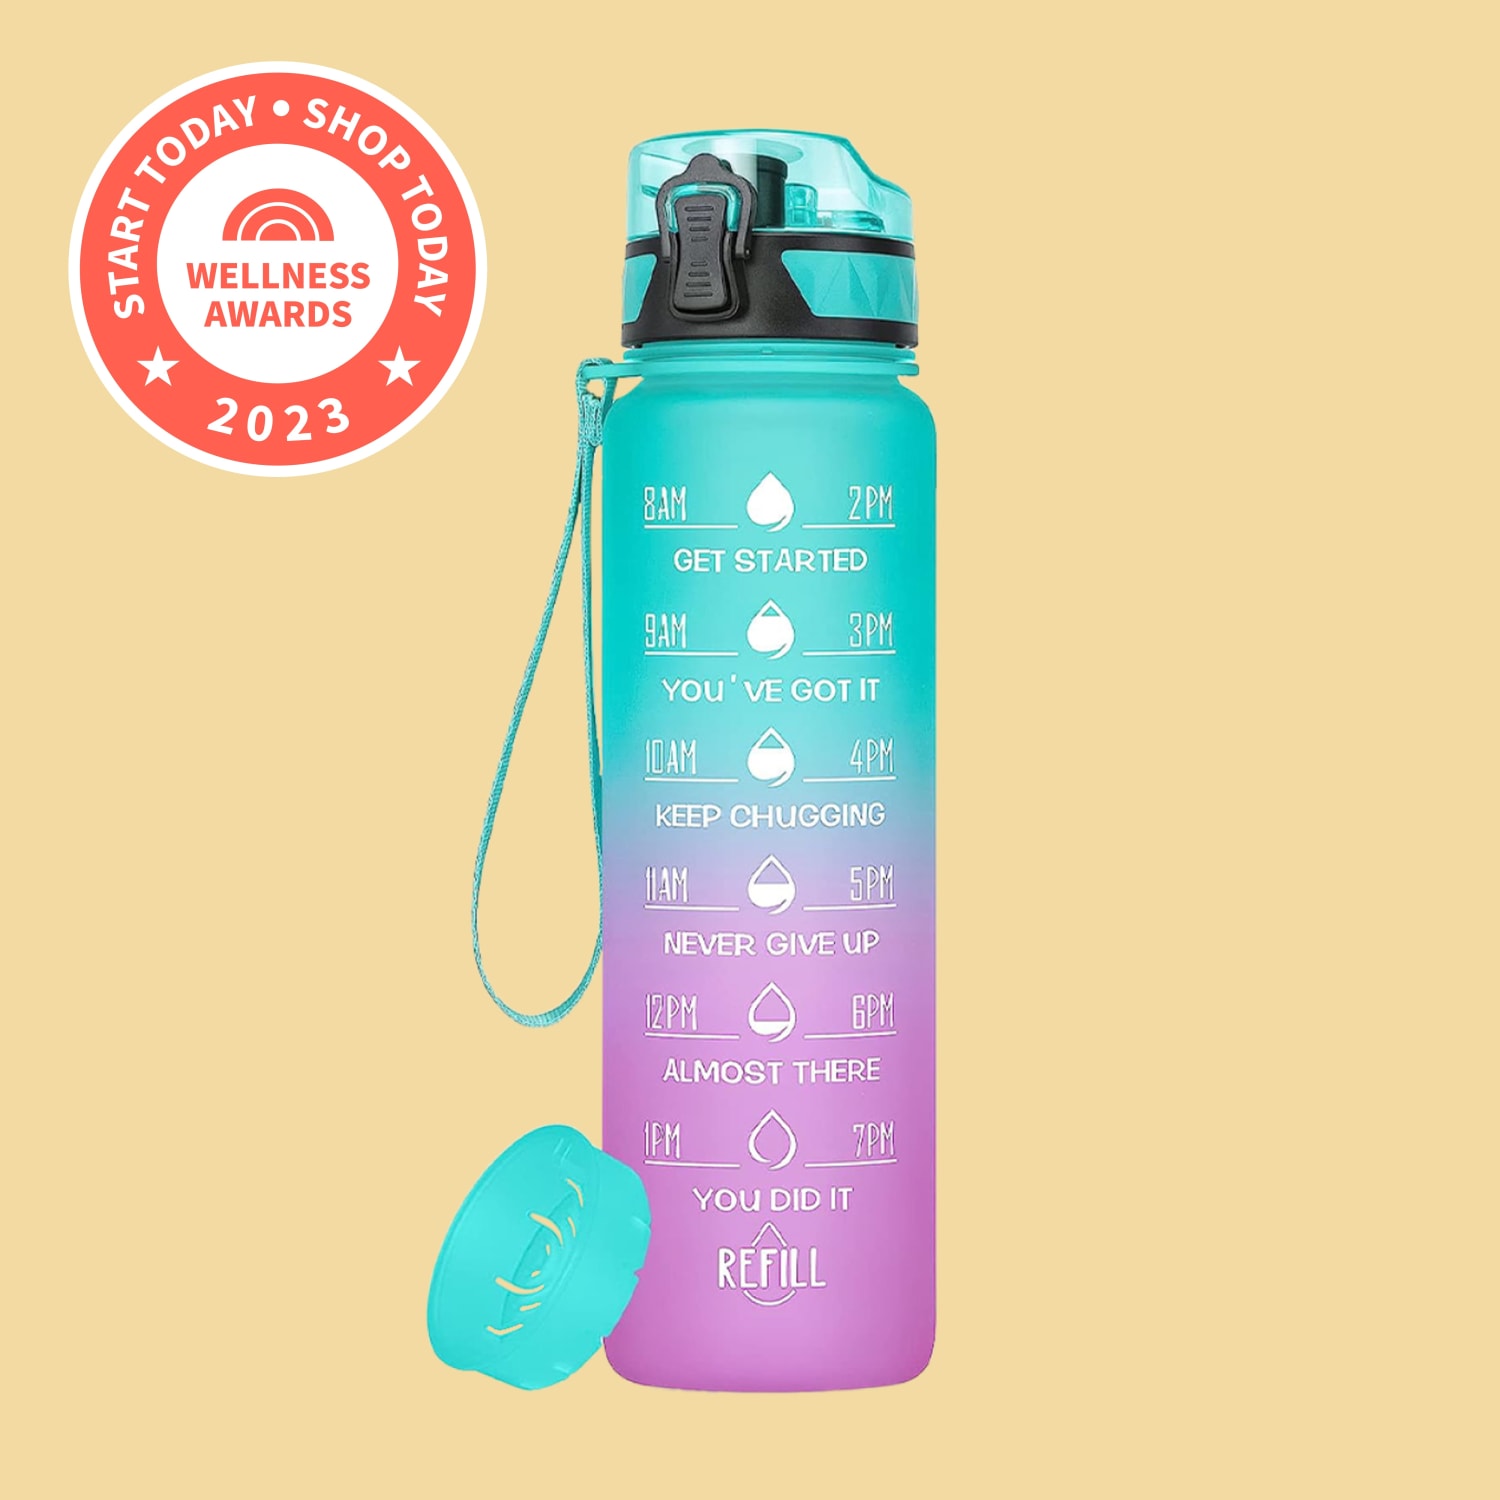 Iron Flask :: The LAST Water Bottle You Will Ever Need